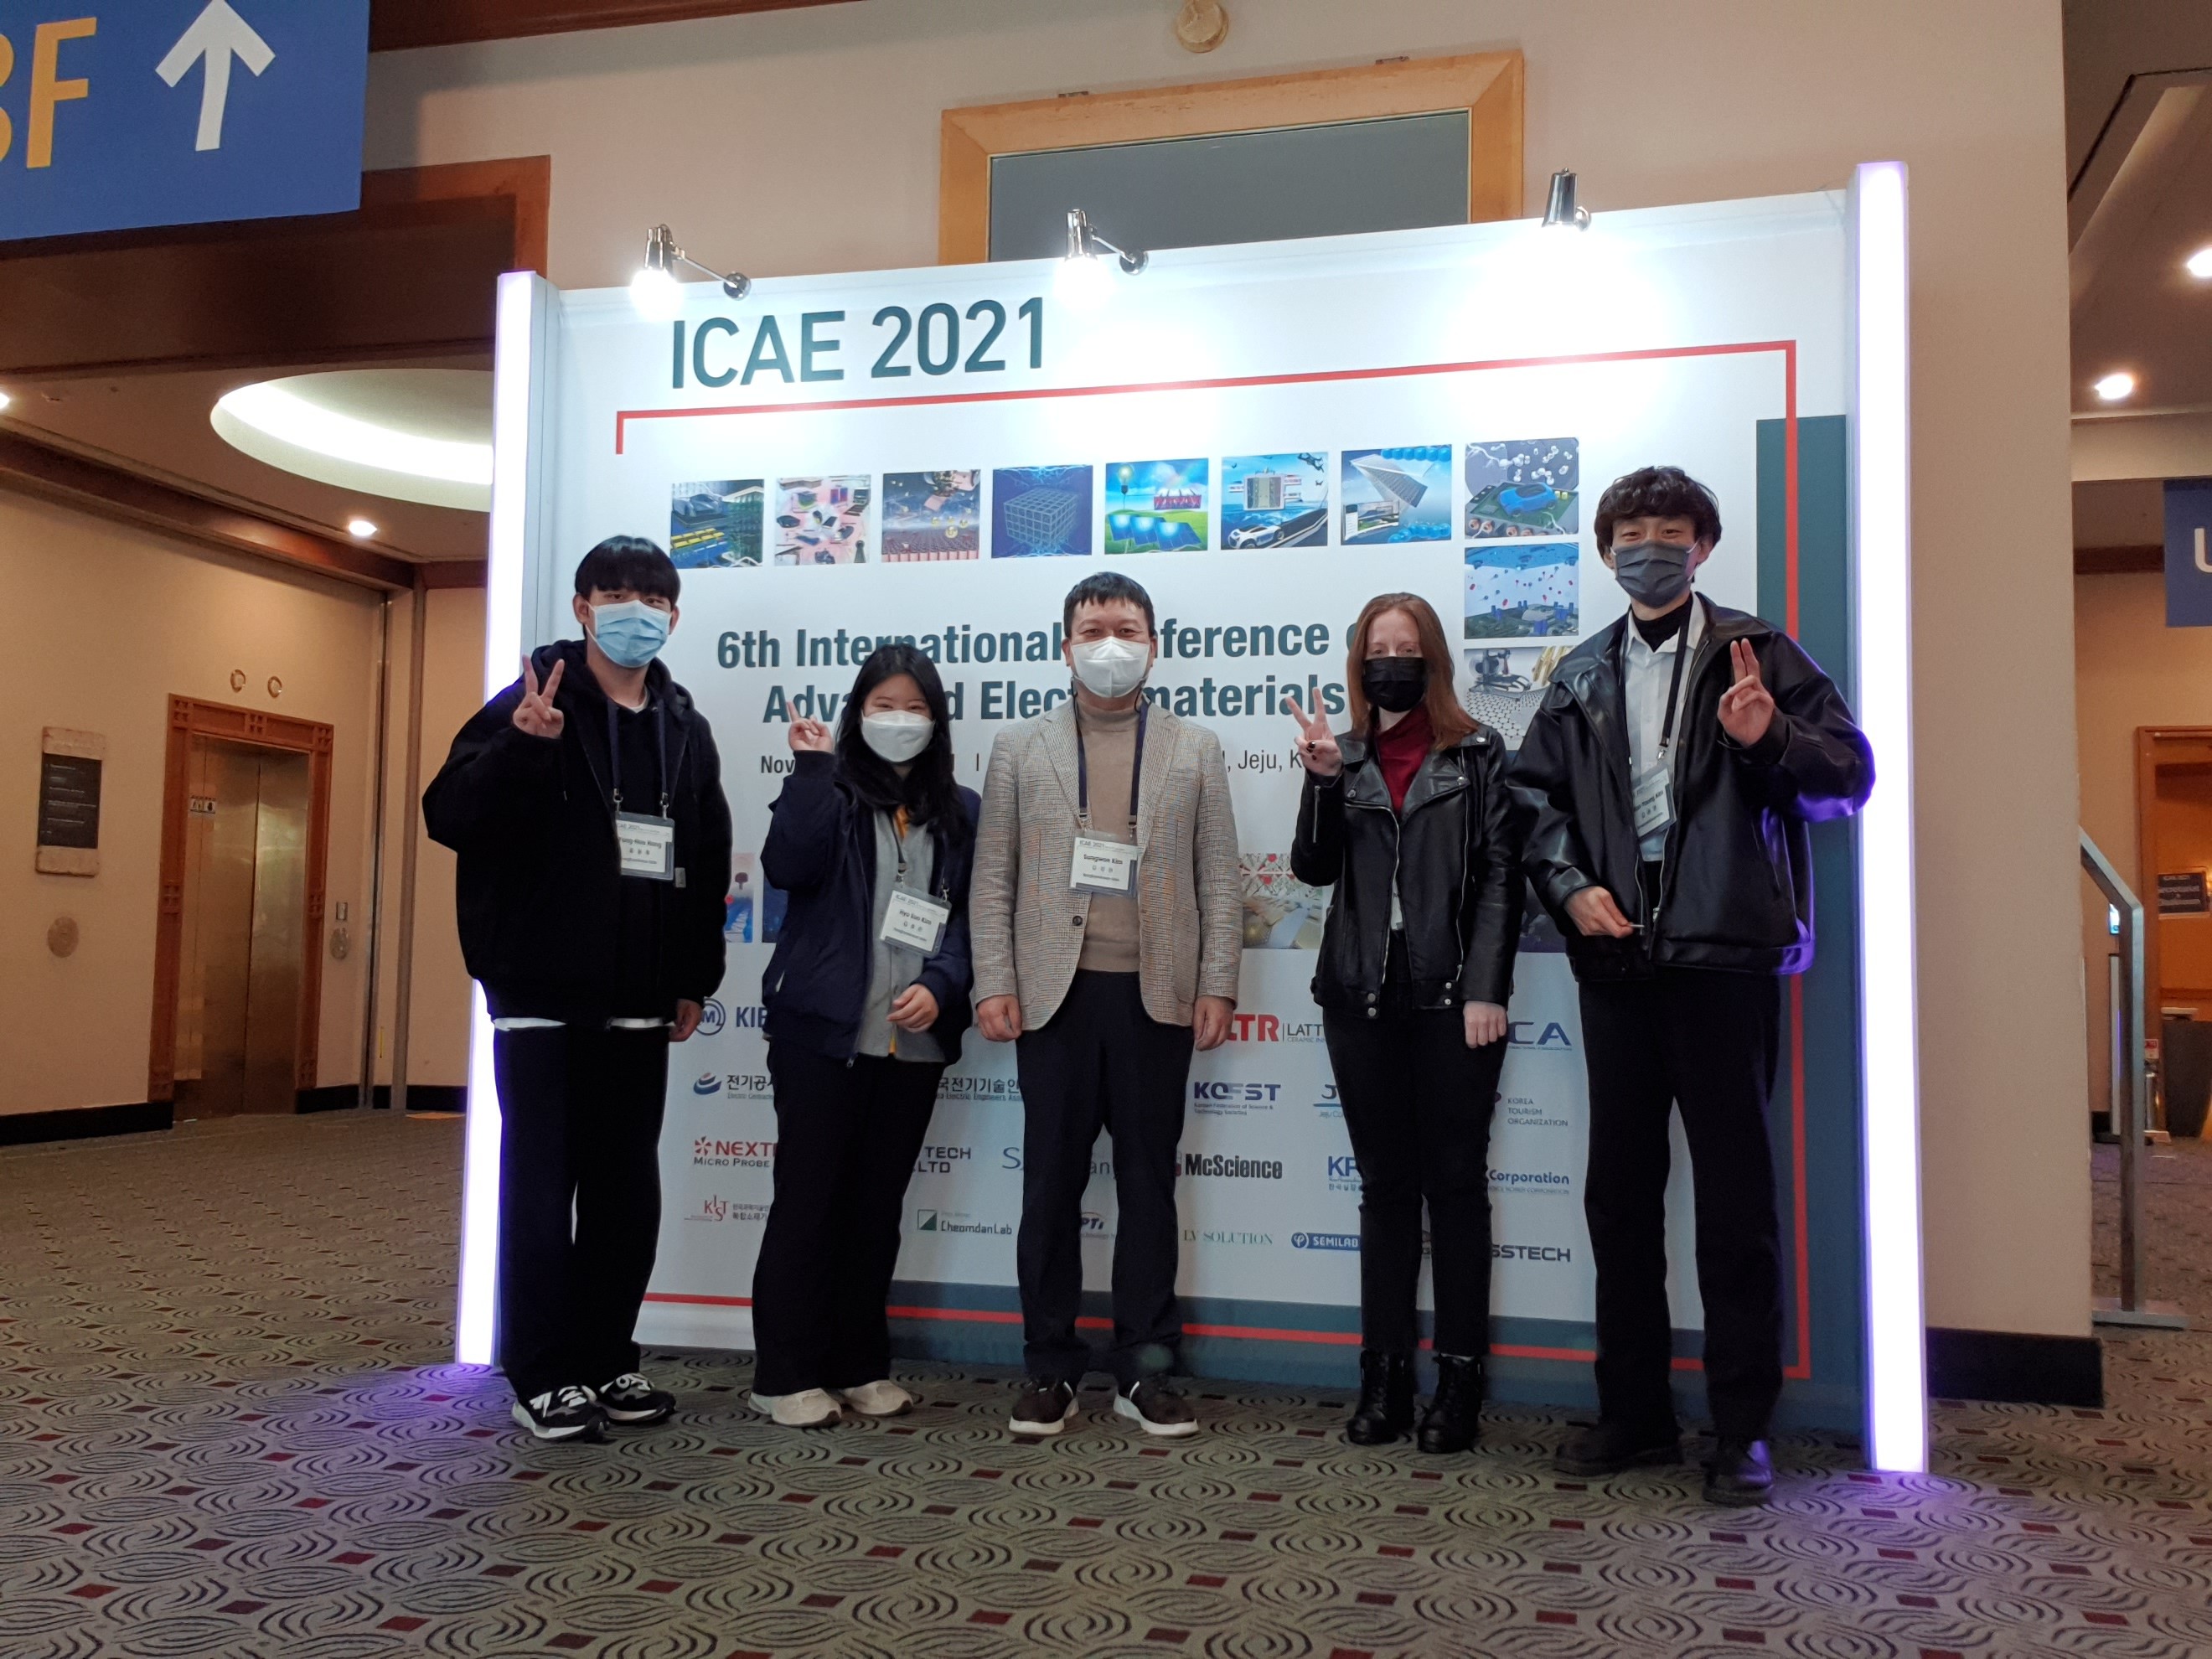 6th International Conference on Advanced Electromaterials (ICAE 2021)